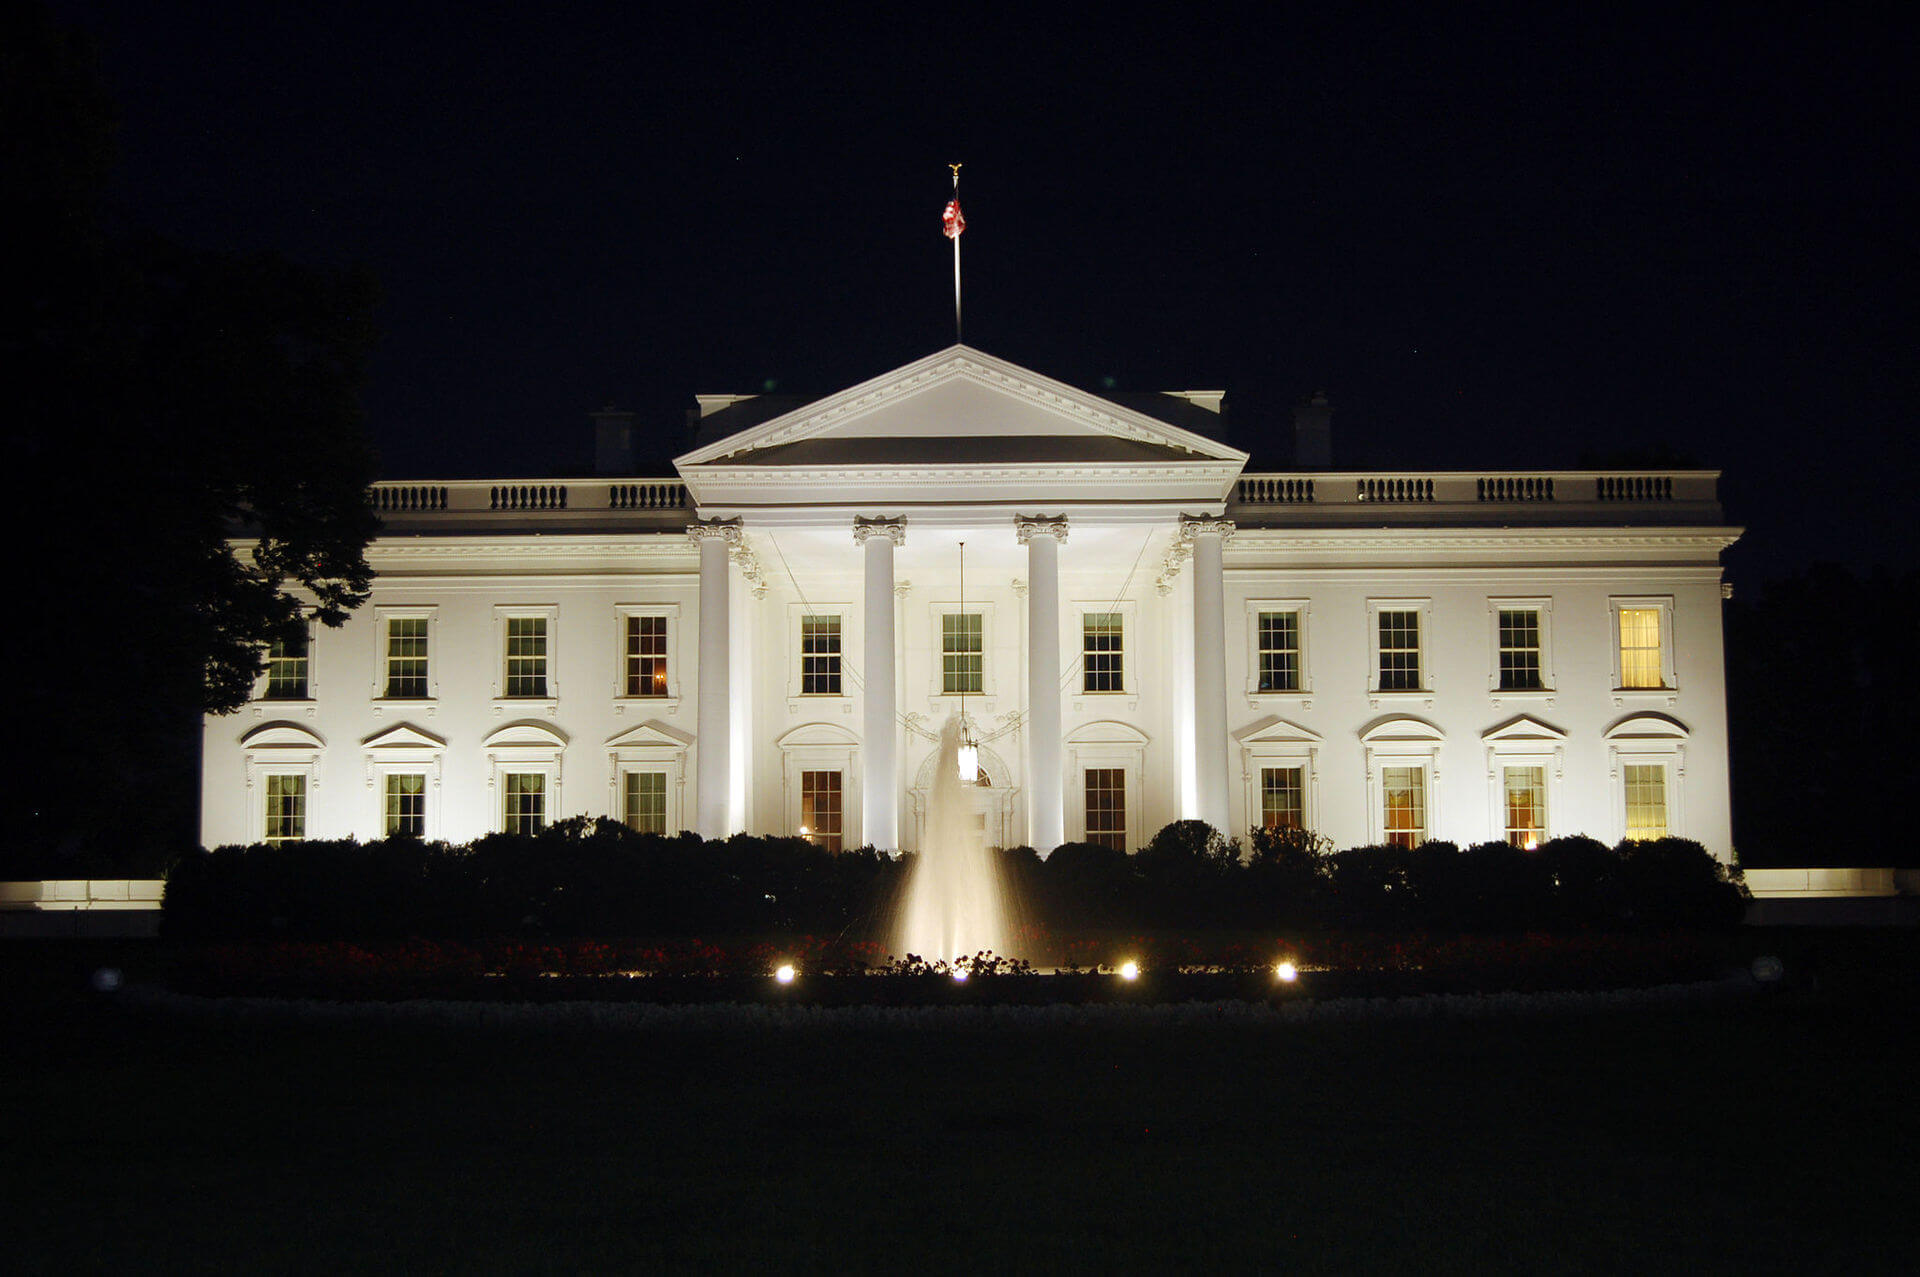 The White house at night